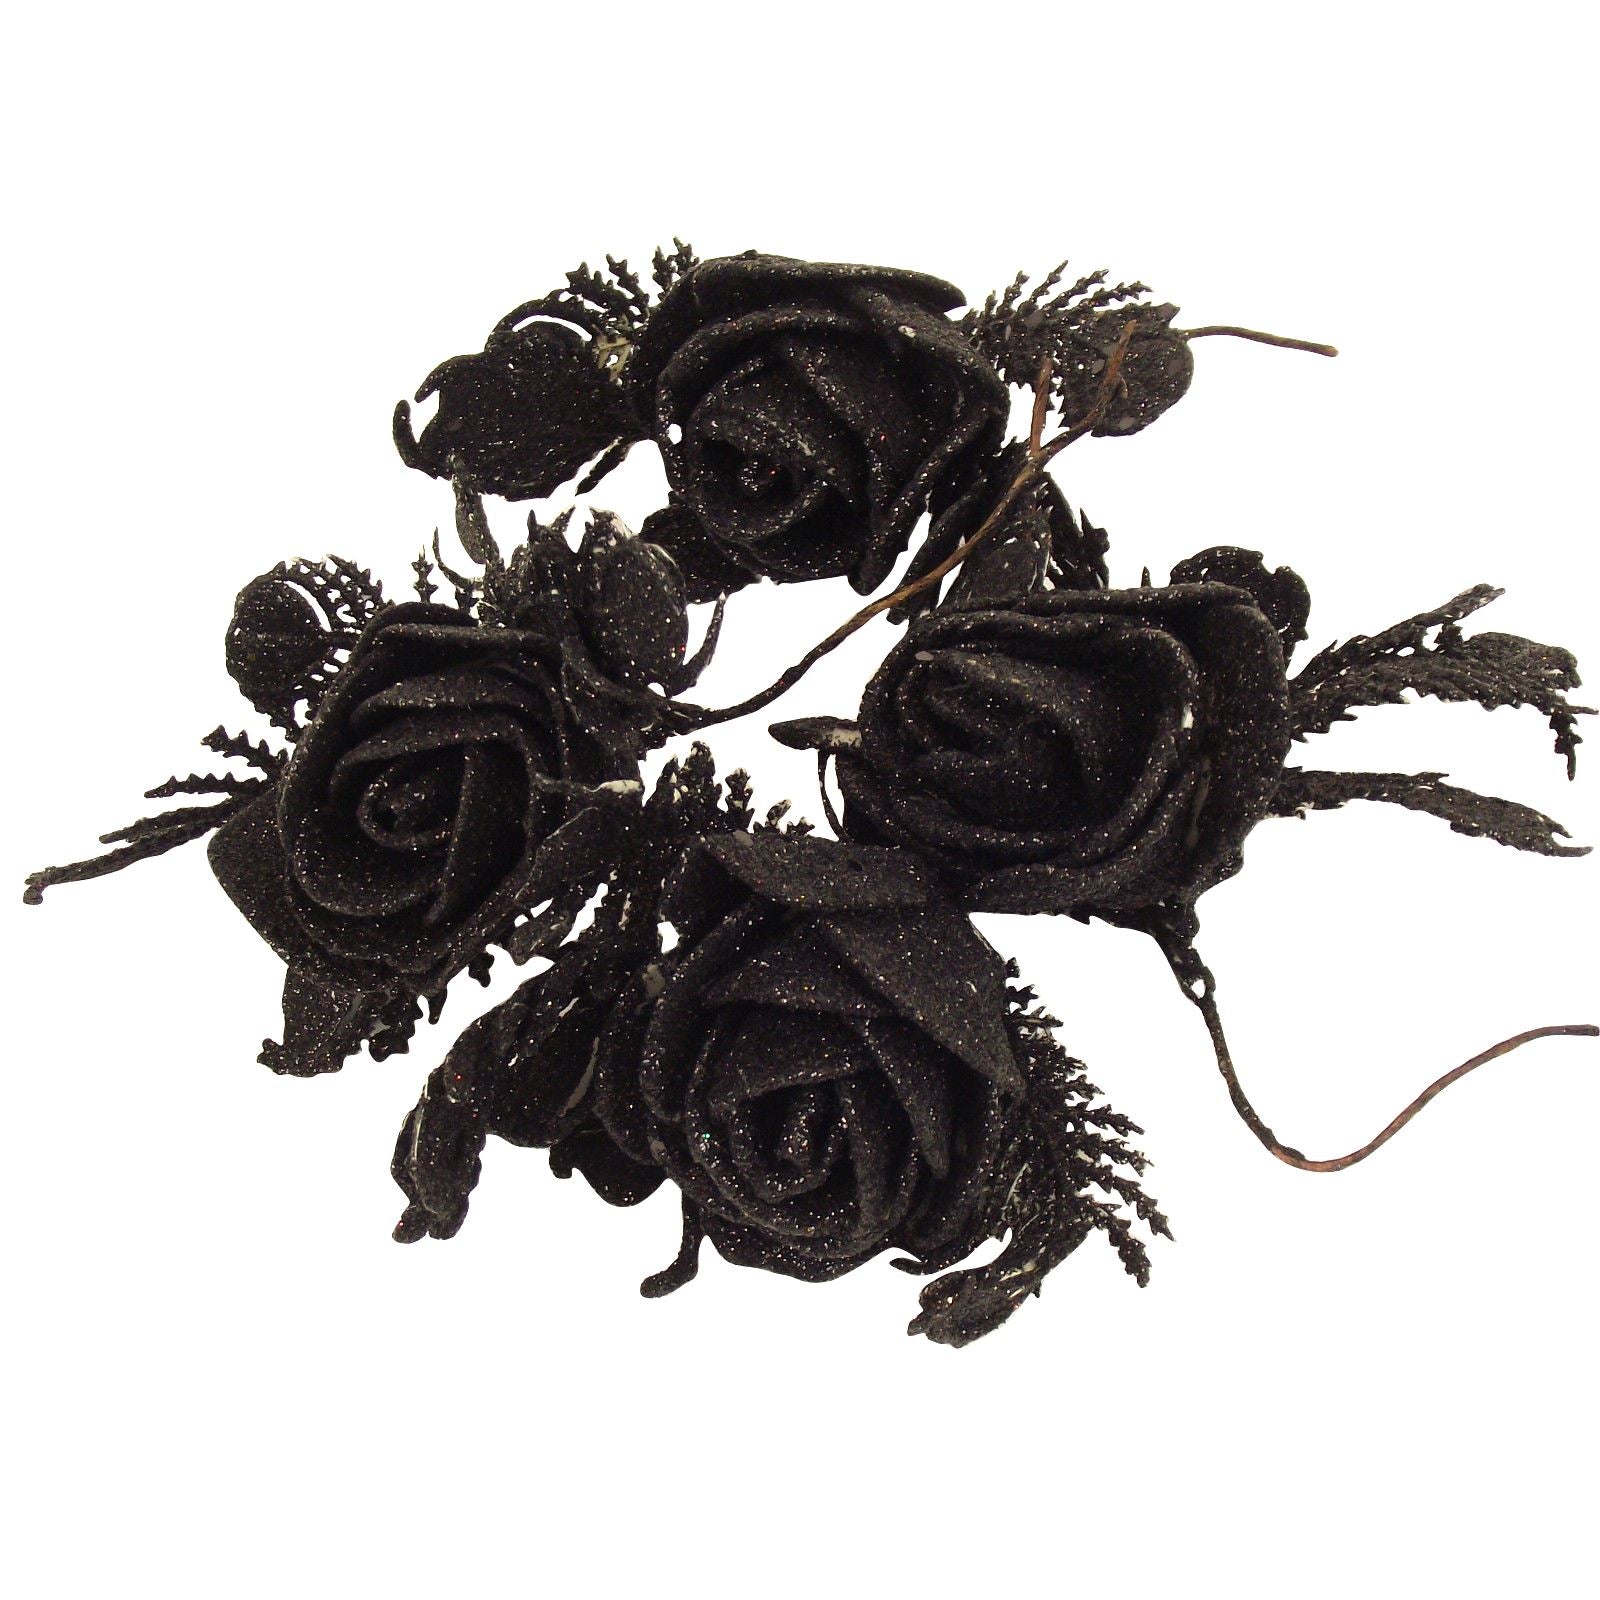 Clearance - 4x Gothic Glitter Roses